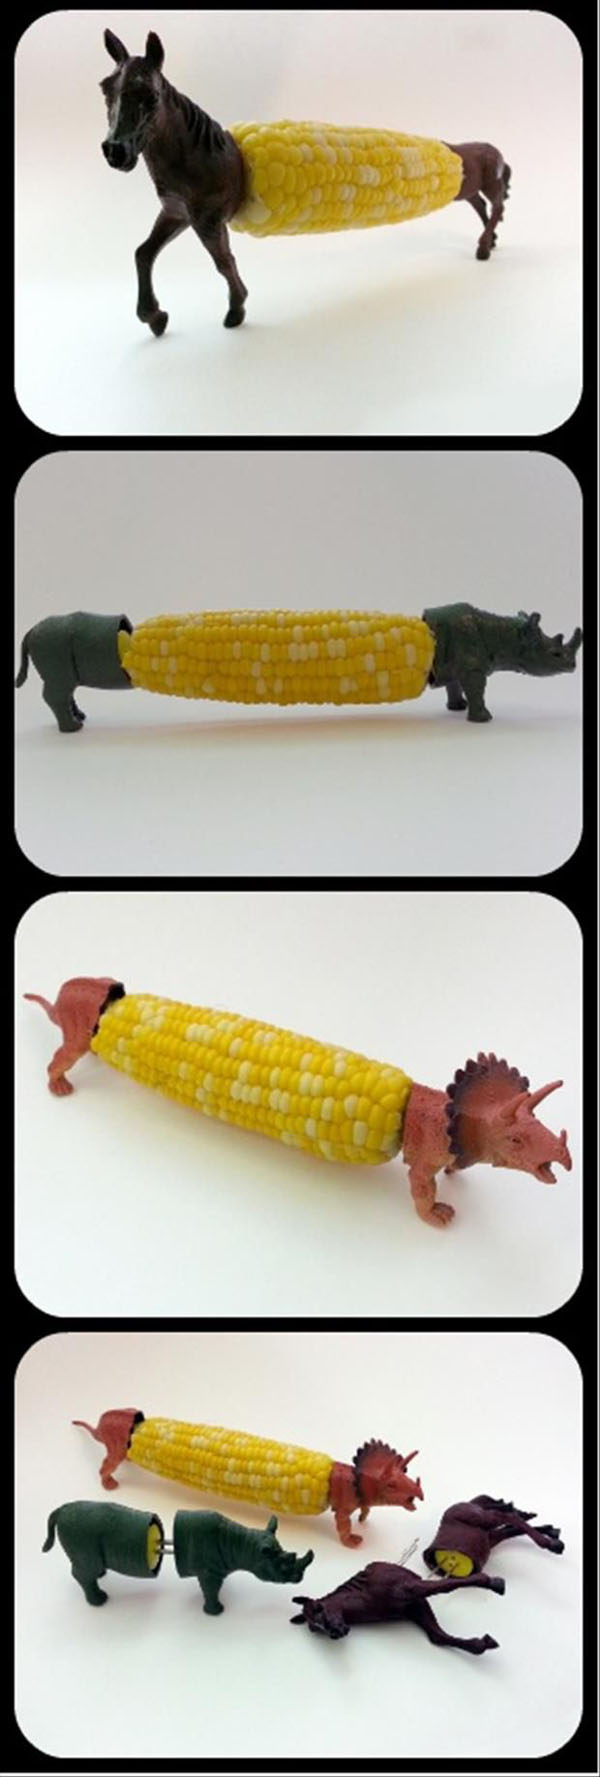 A series of pictures depicting a playful toy corn adorned with various animal figures.